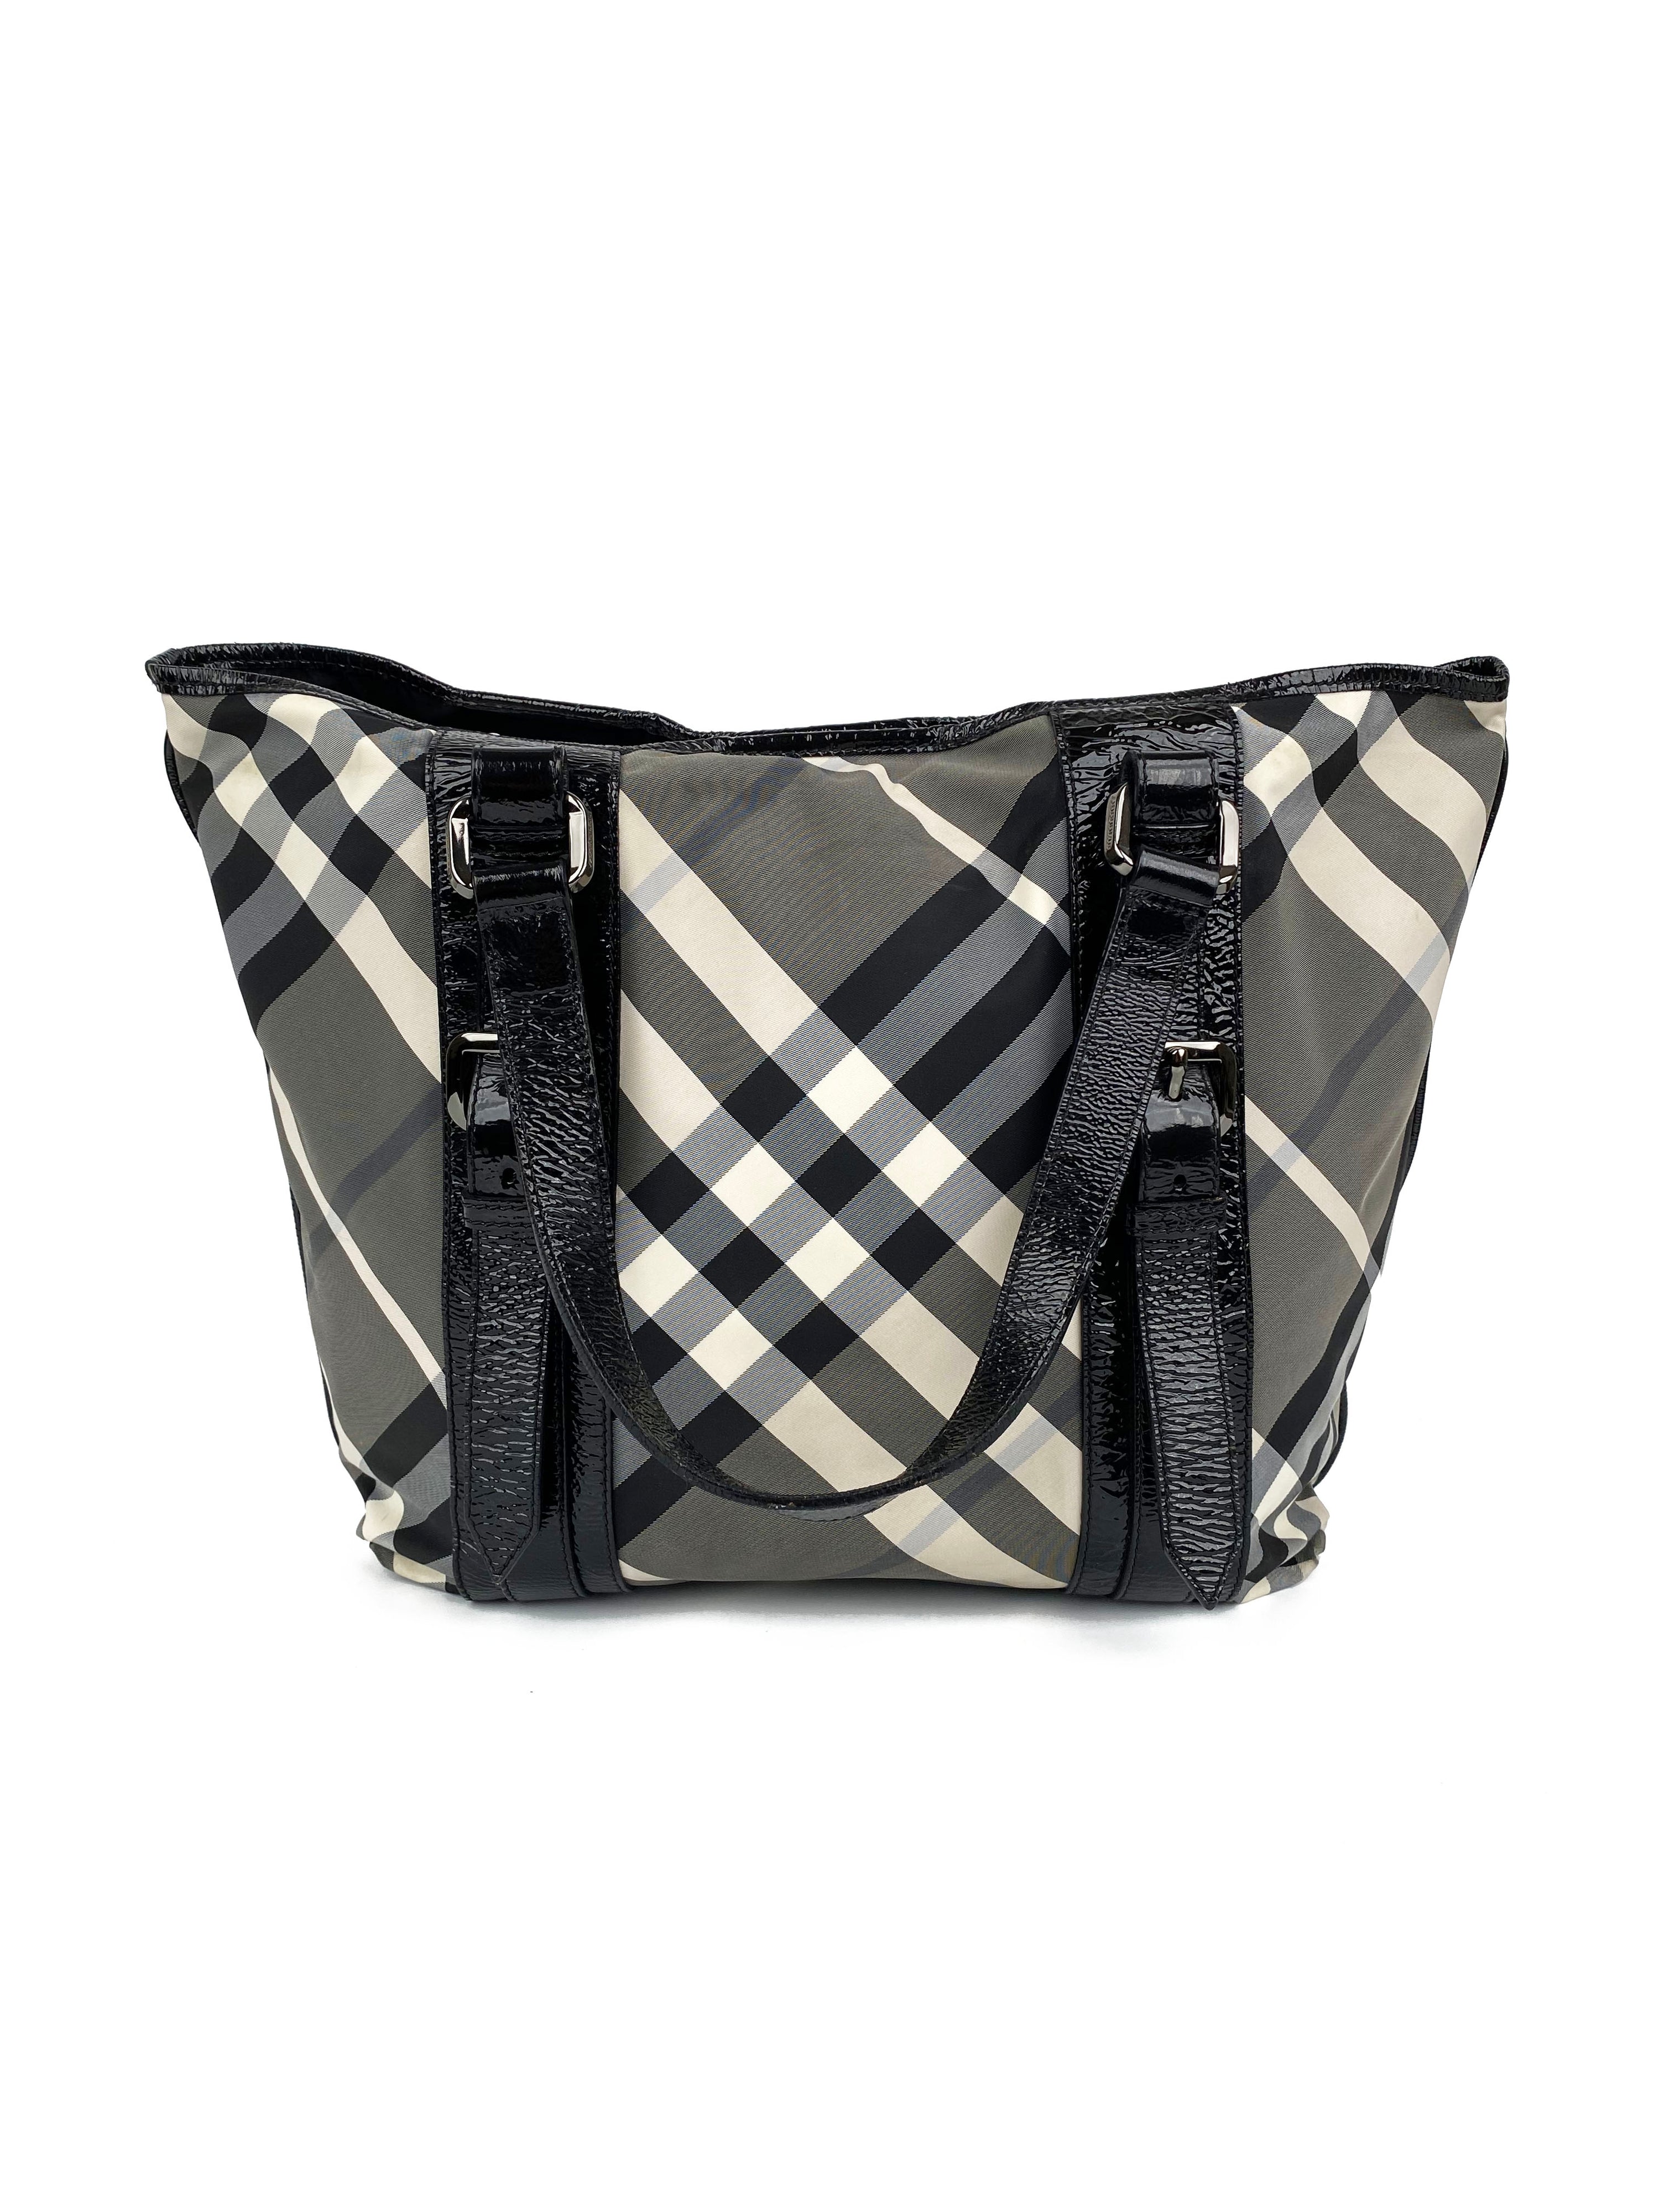 Burberry Black & White Large Grey Tote